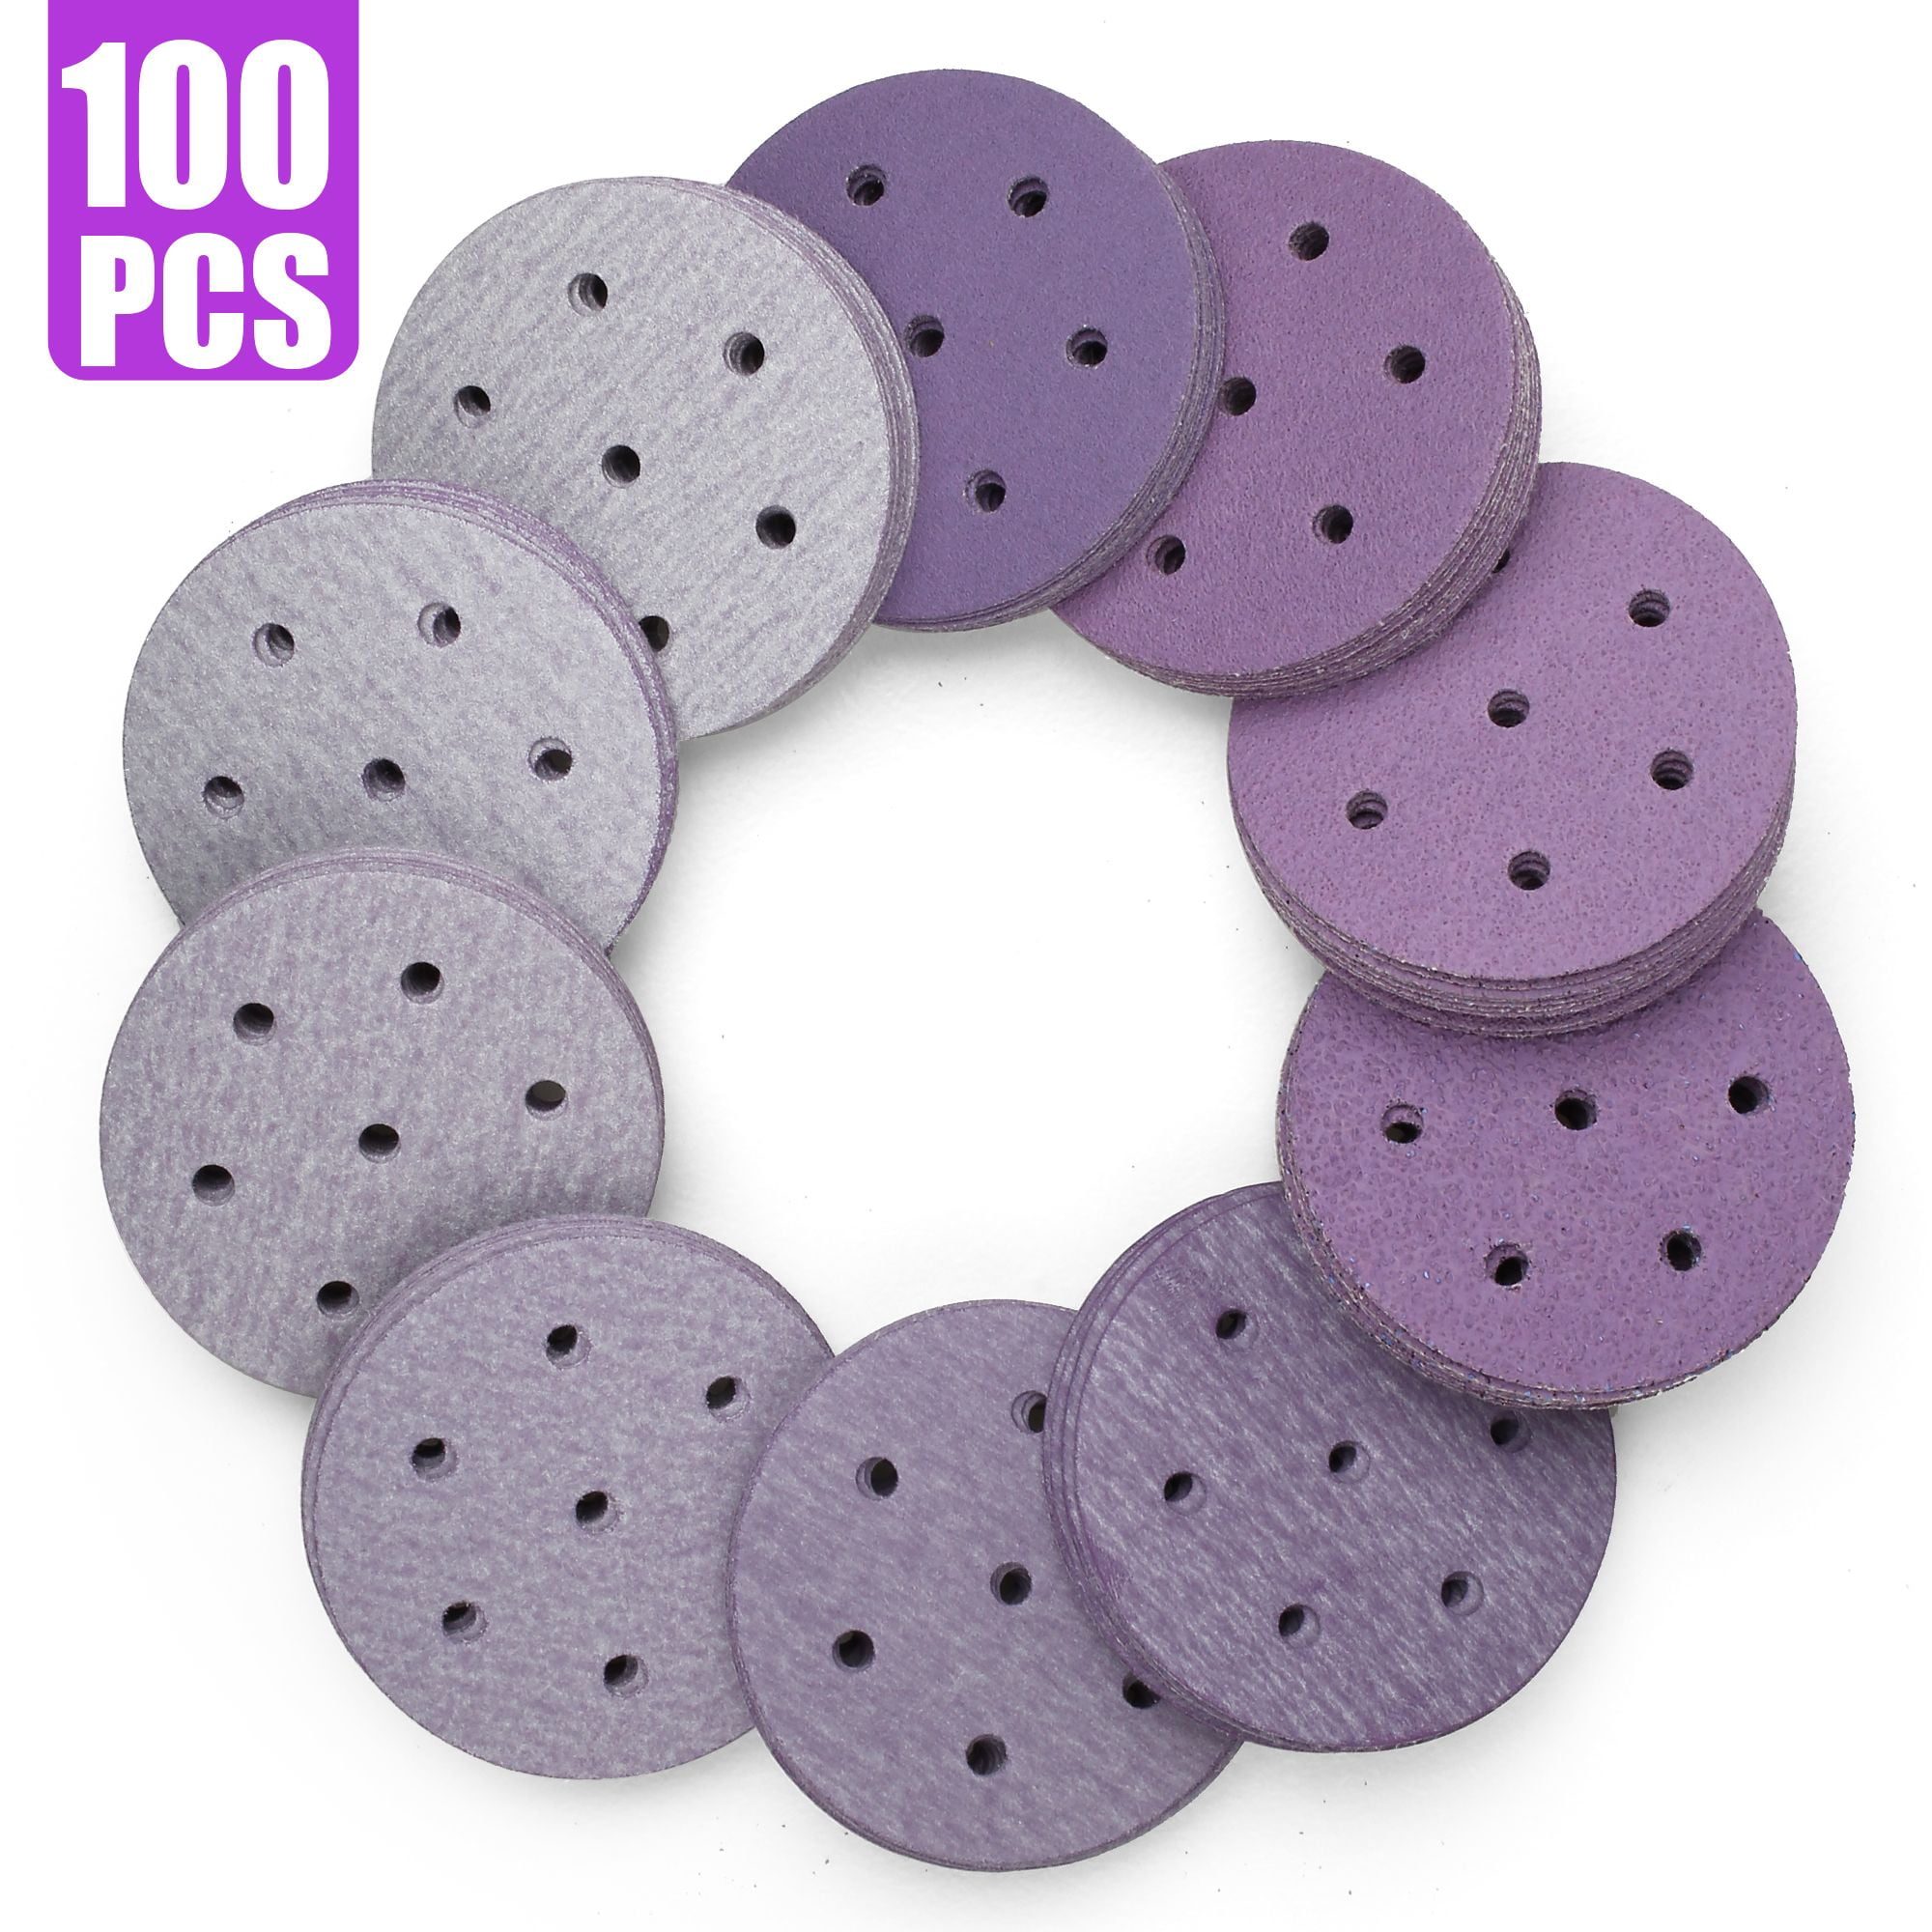 Grit Sanding Discs 40 60 80 100 180 240 320 400 800 1000 5 Inch 8 Holes Various sandpapers from coarse to fine Fit for Power Random Orbit Sander （A Pack of 20） 40 Grits